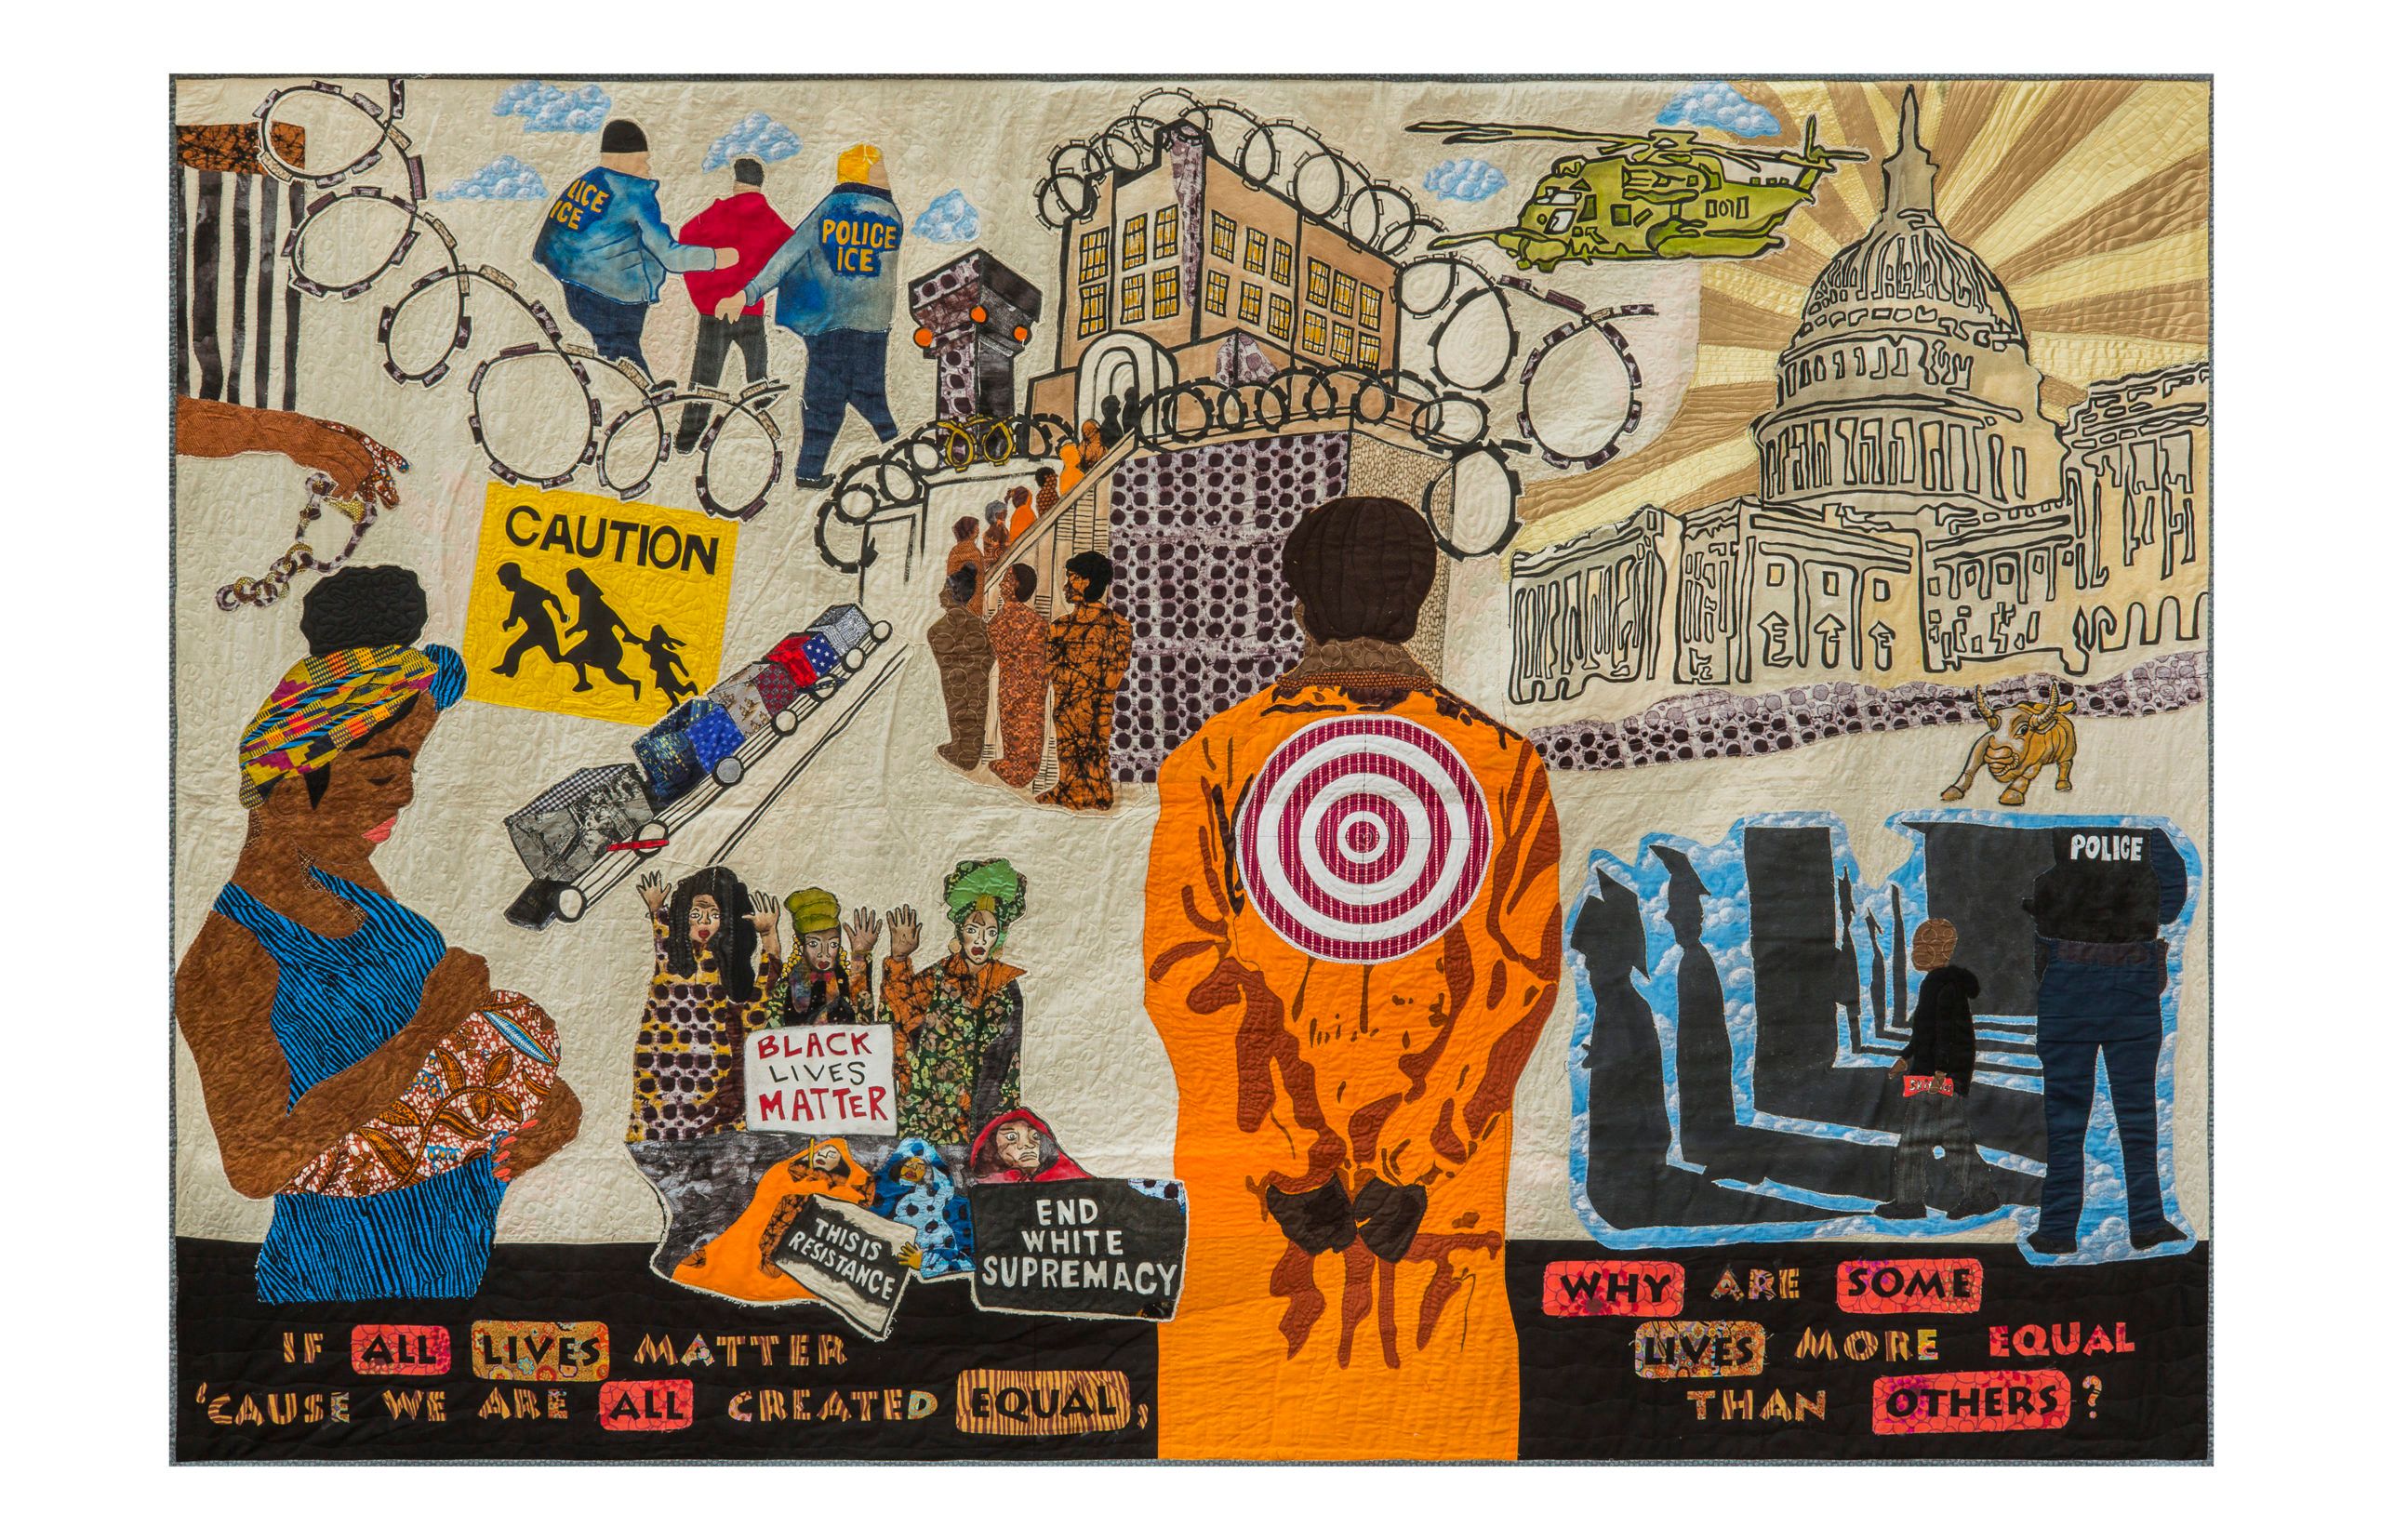 Image of an incarcerated person with a target on their back, the police state, and black and brown people